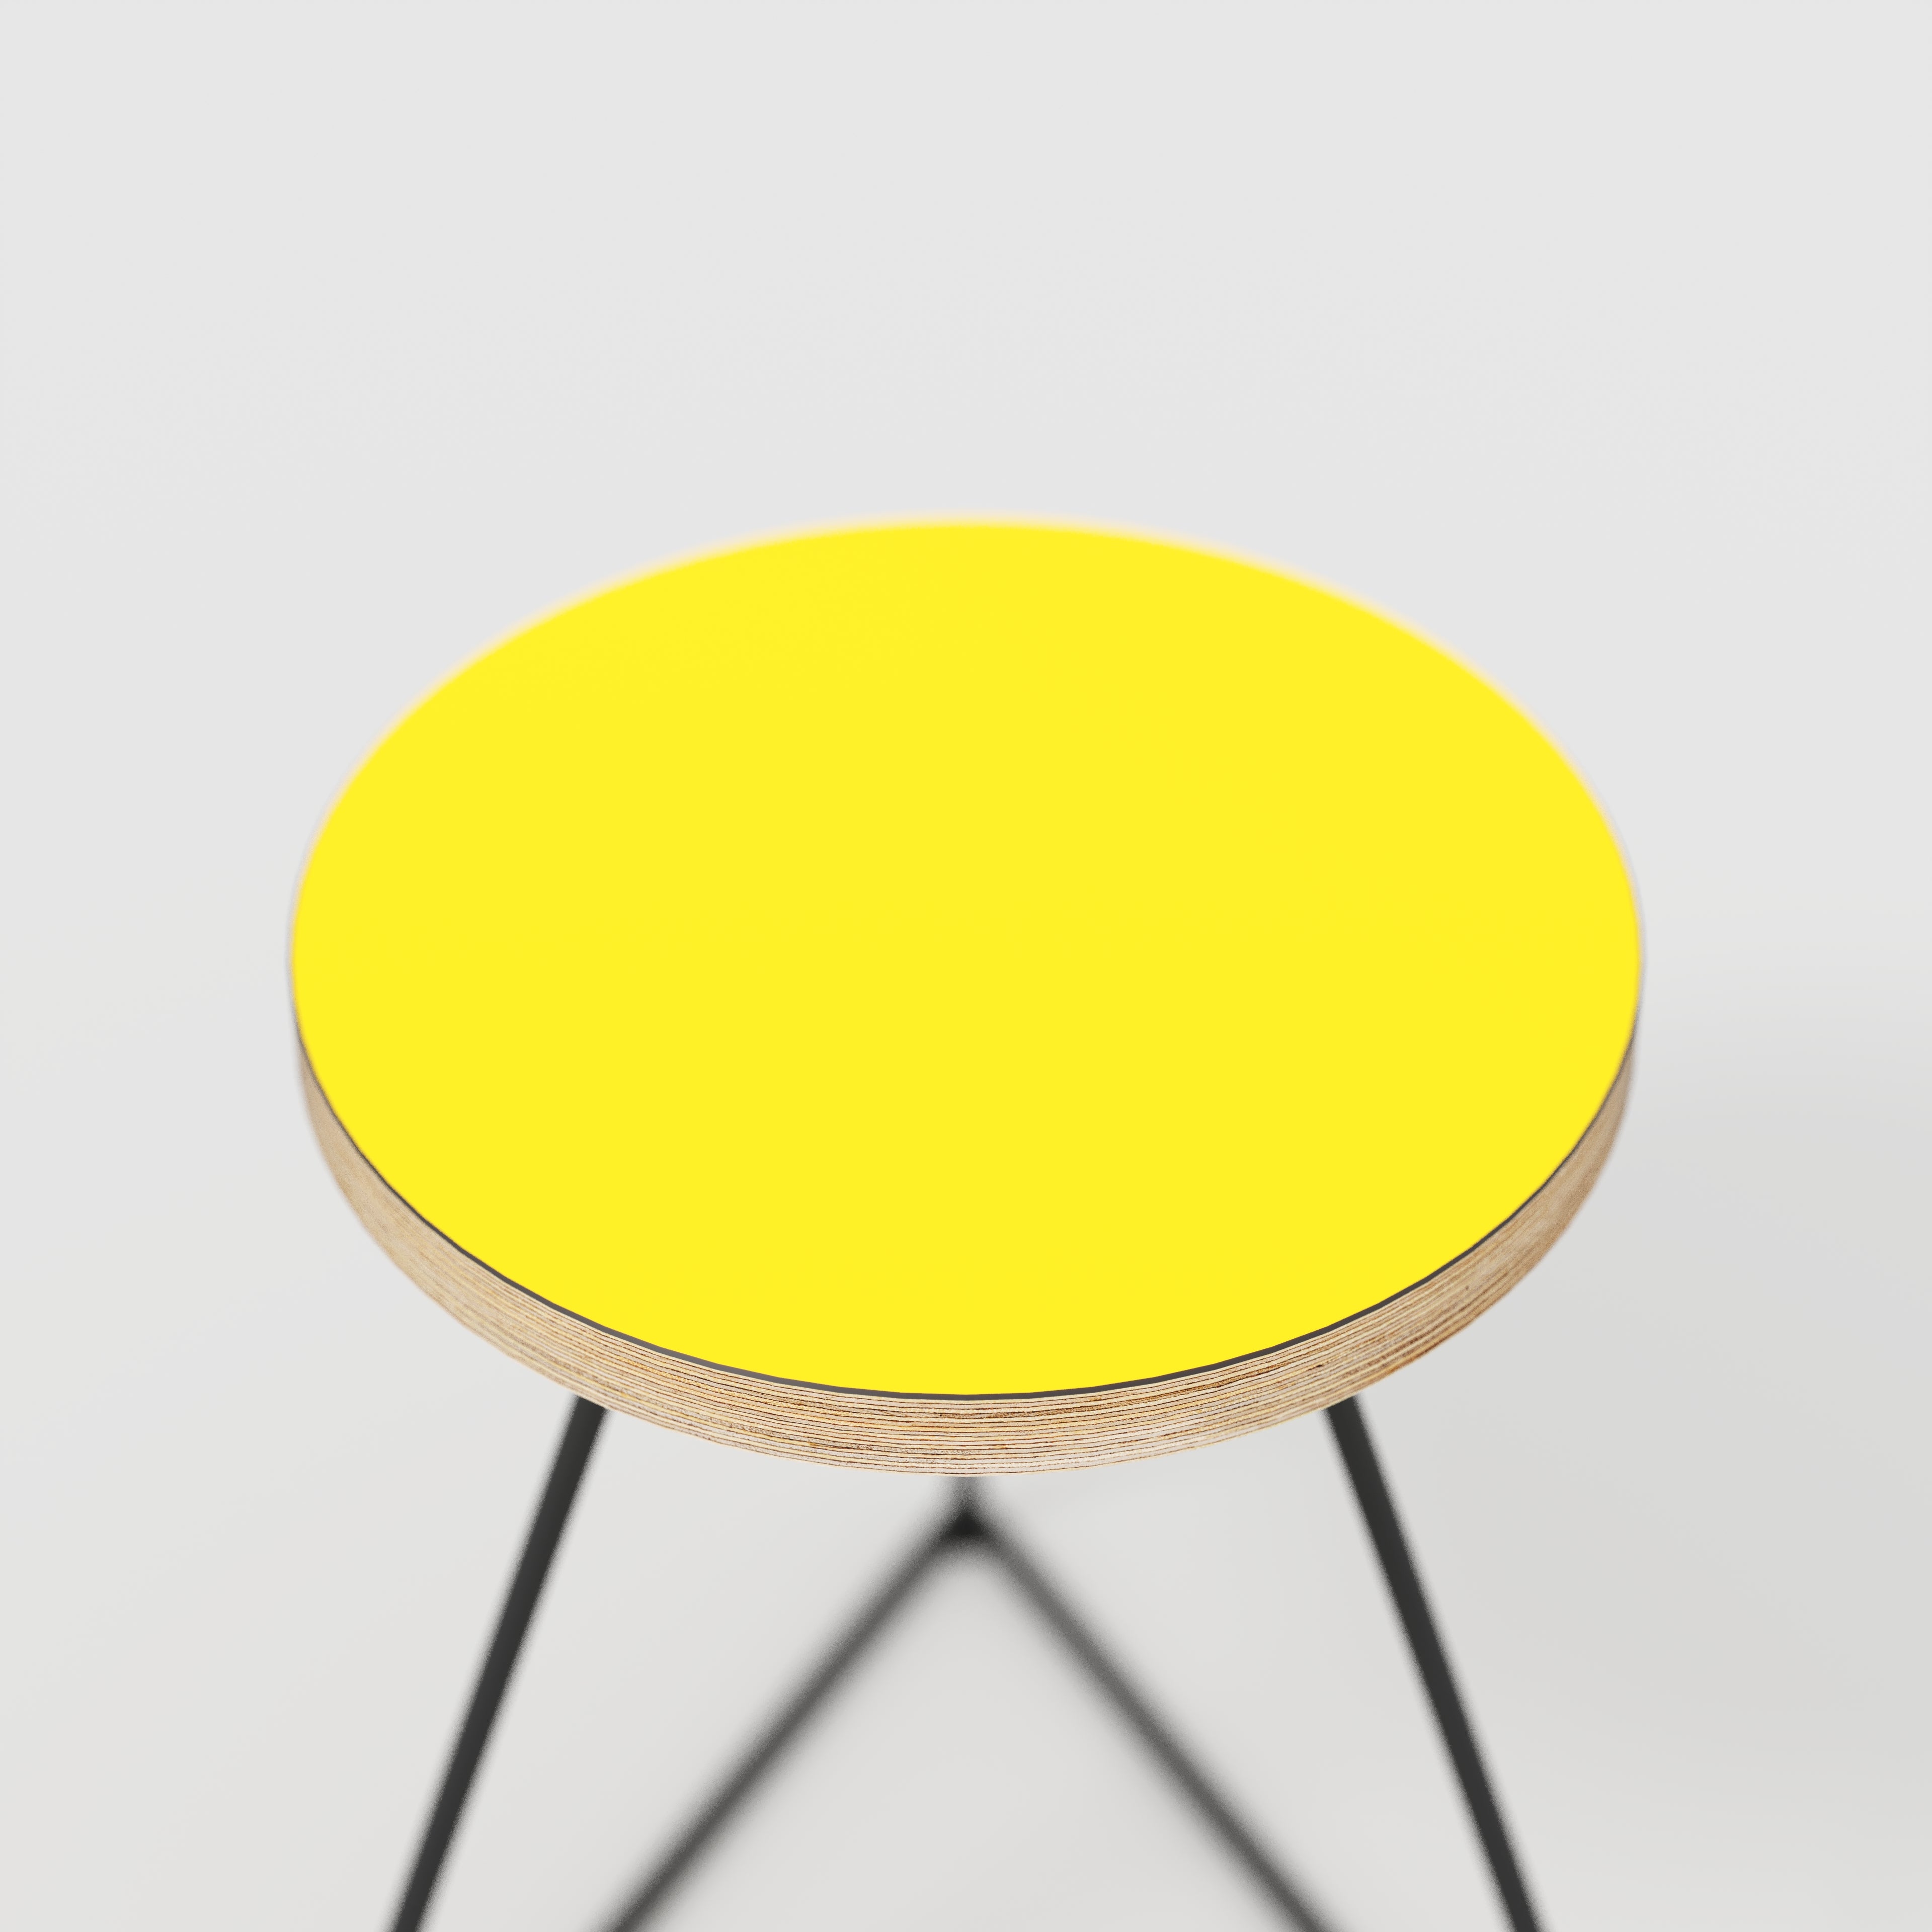 Stool with Black Prism Base - Formica Chrome Yellow